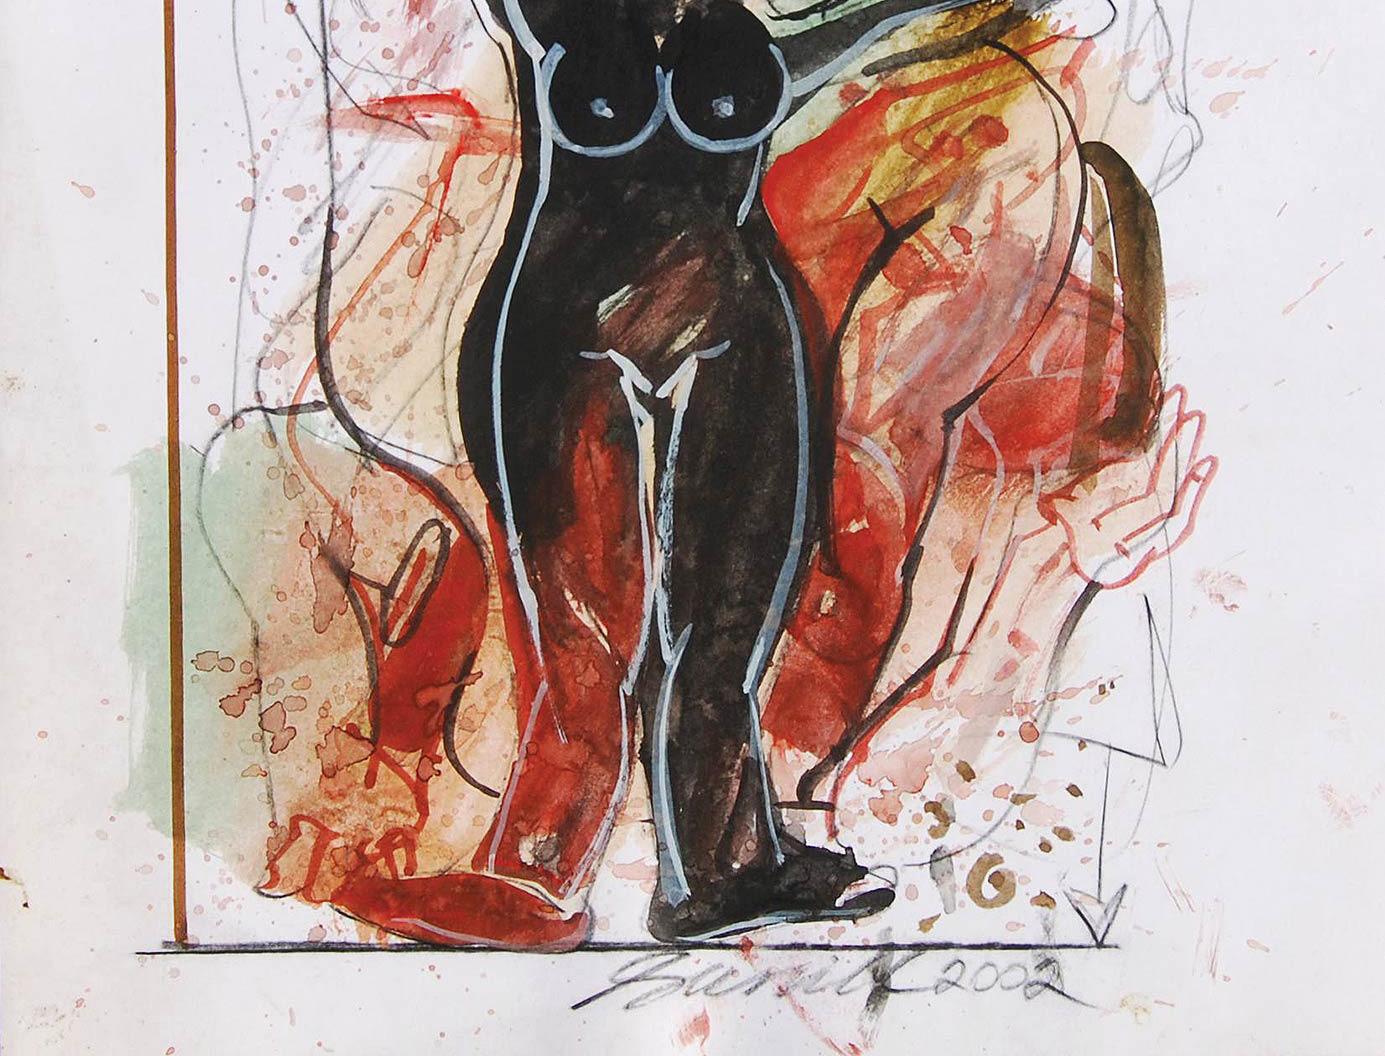 Sunil Das - Woman & Horse - 12.25 x 10.50 inches (unframed size)
Mixed Media on Paper
Inclusive of shipment in ready to hang form.

Sunil Das (1939-2015) was a Master Modern Indian Artist from Bengal. Extremely successful right from his college